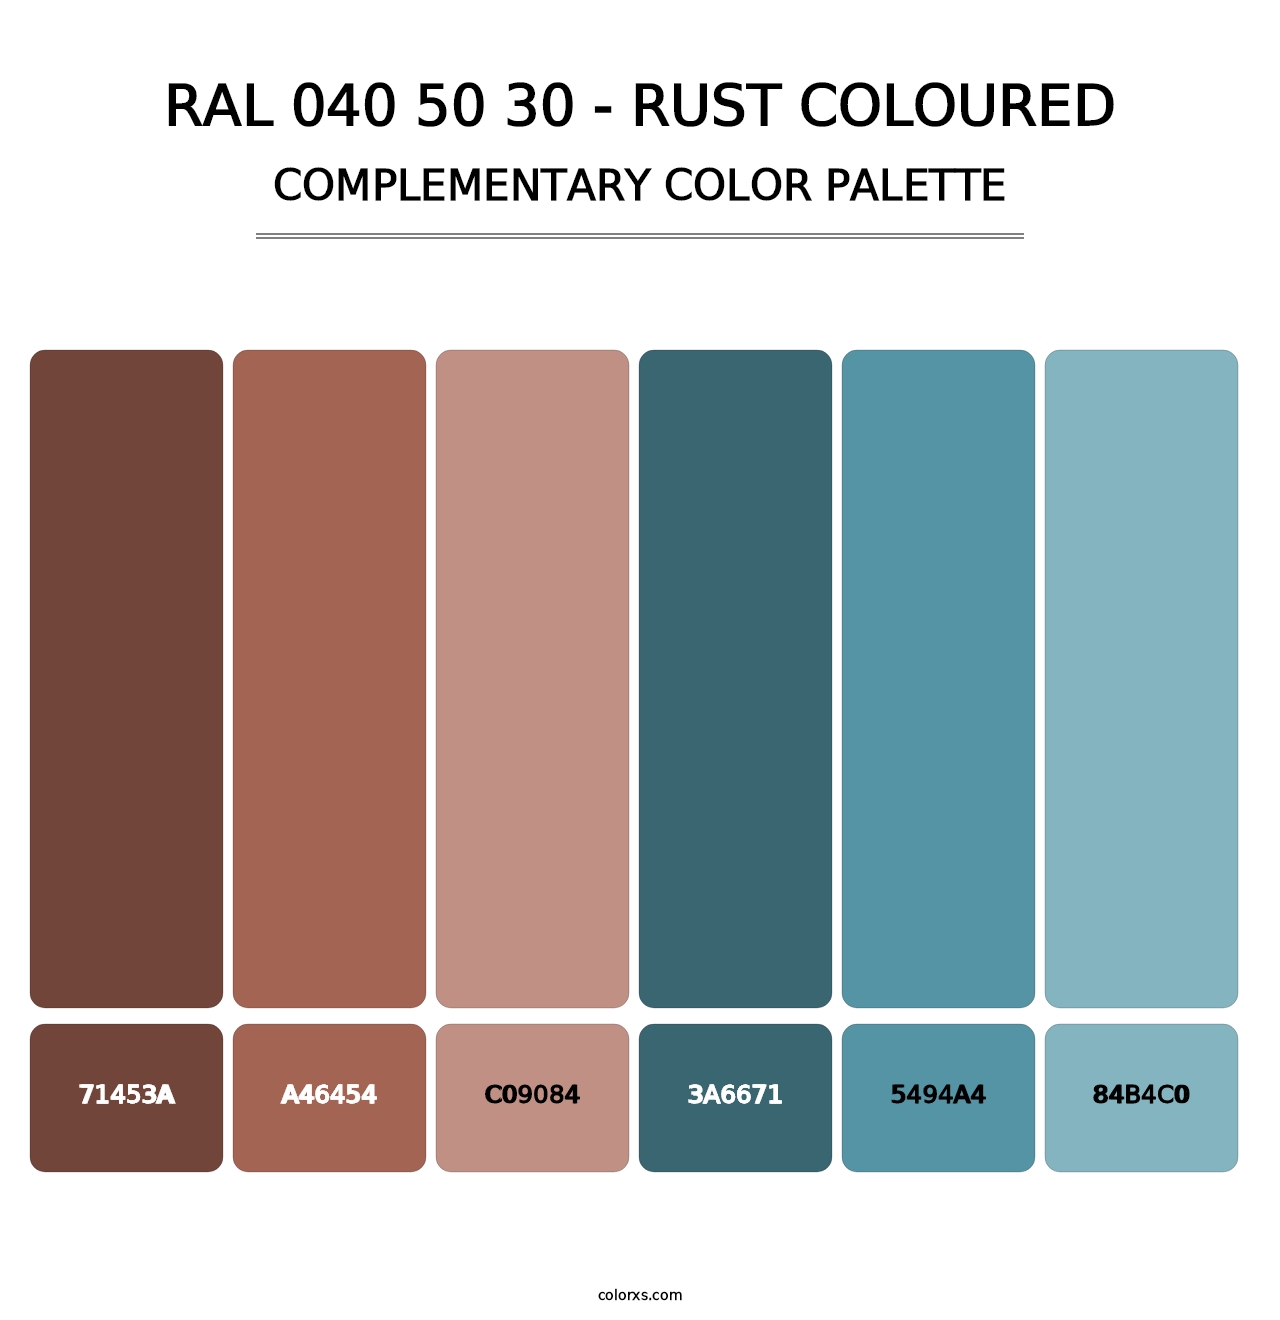 RAL 040 50 30 - Rust Coloured - Complementary Color Palette